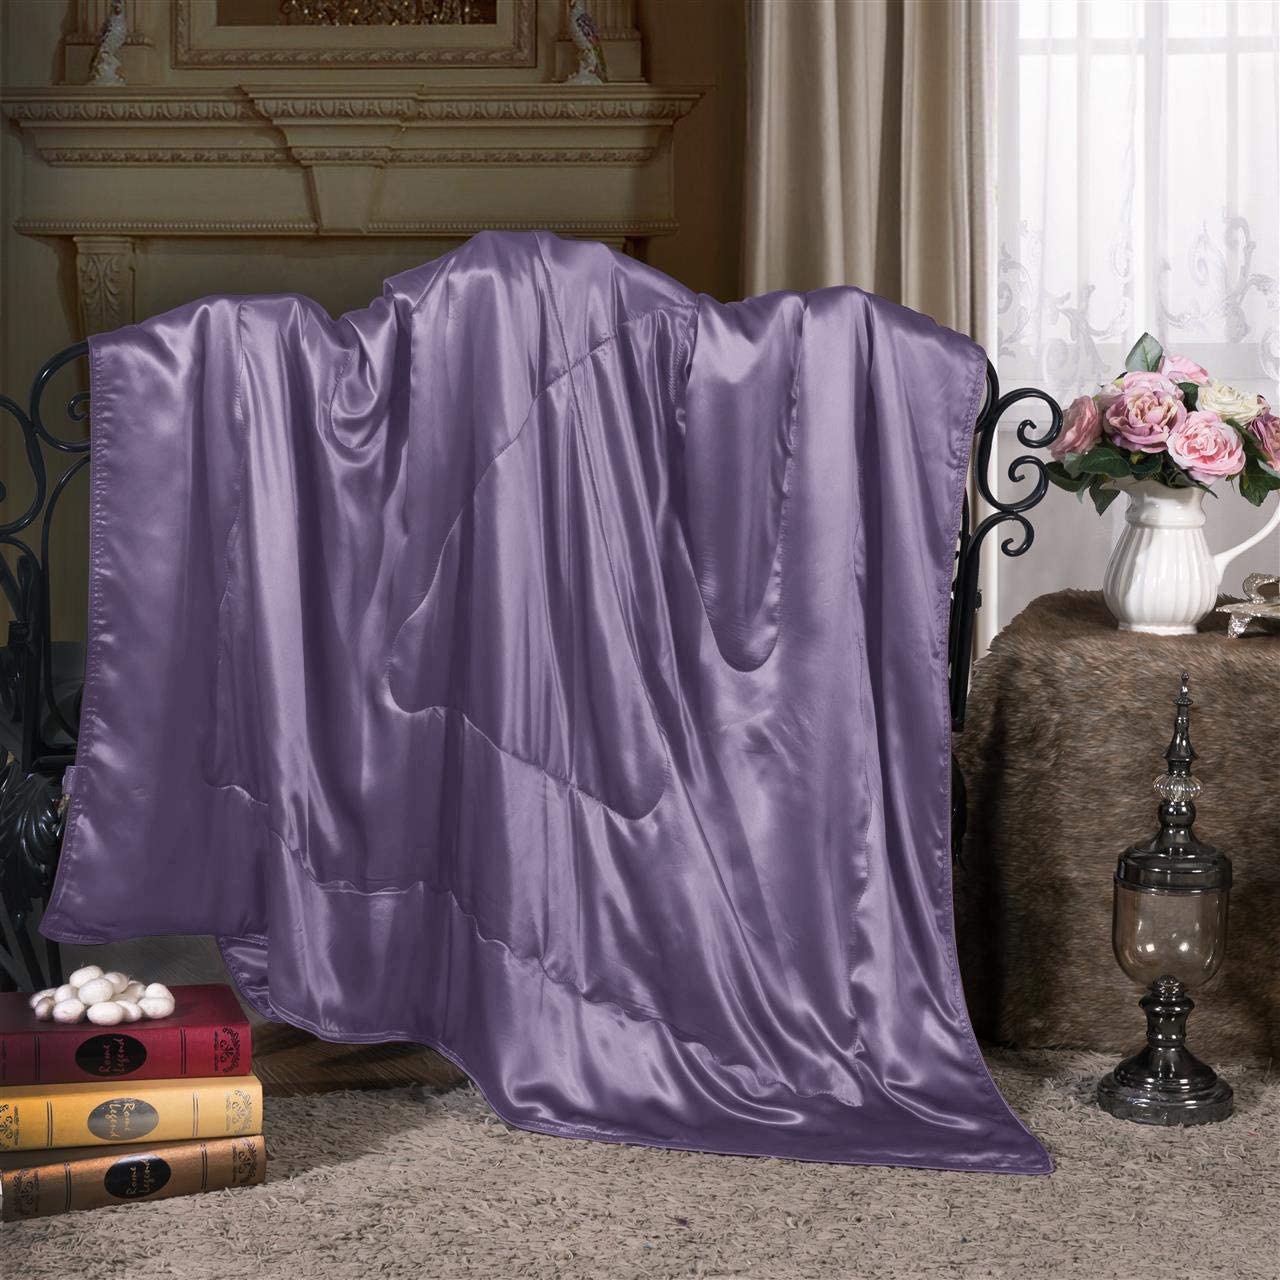 thumbnail 9 - Cozysilk Pure Silk Throw Blanket, 100% Mulberry Silk Inside and Outside, Pure Si